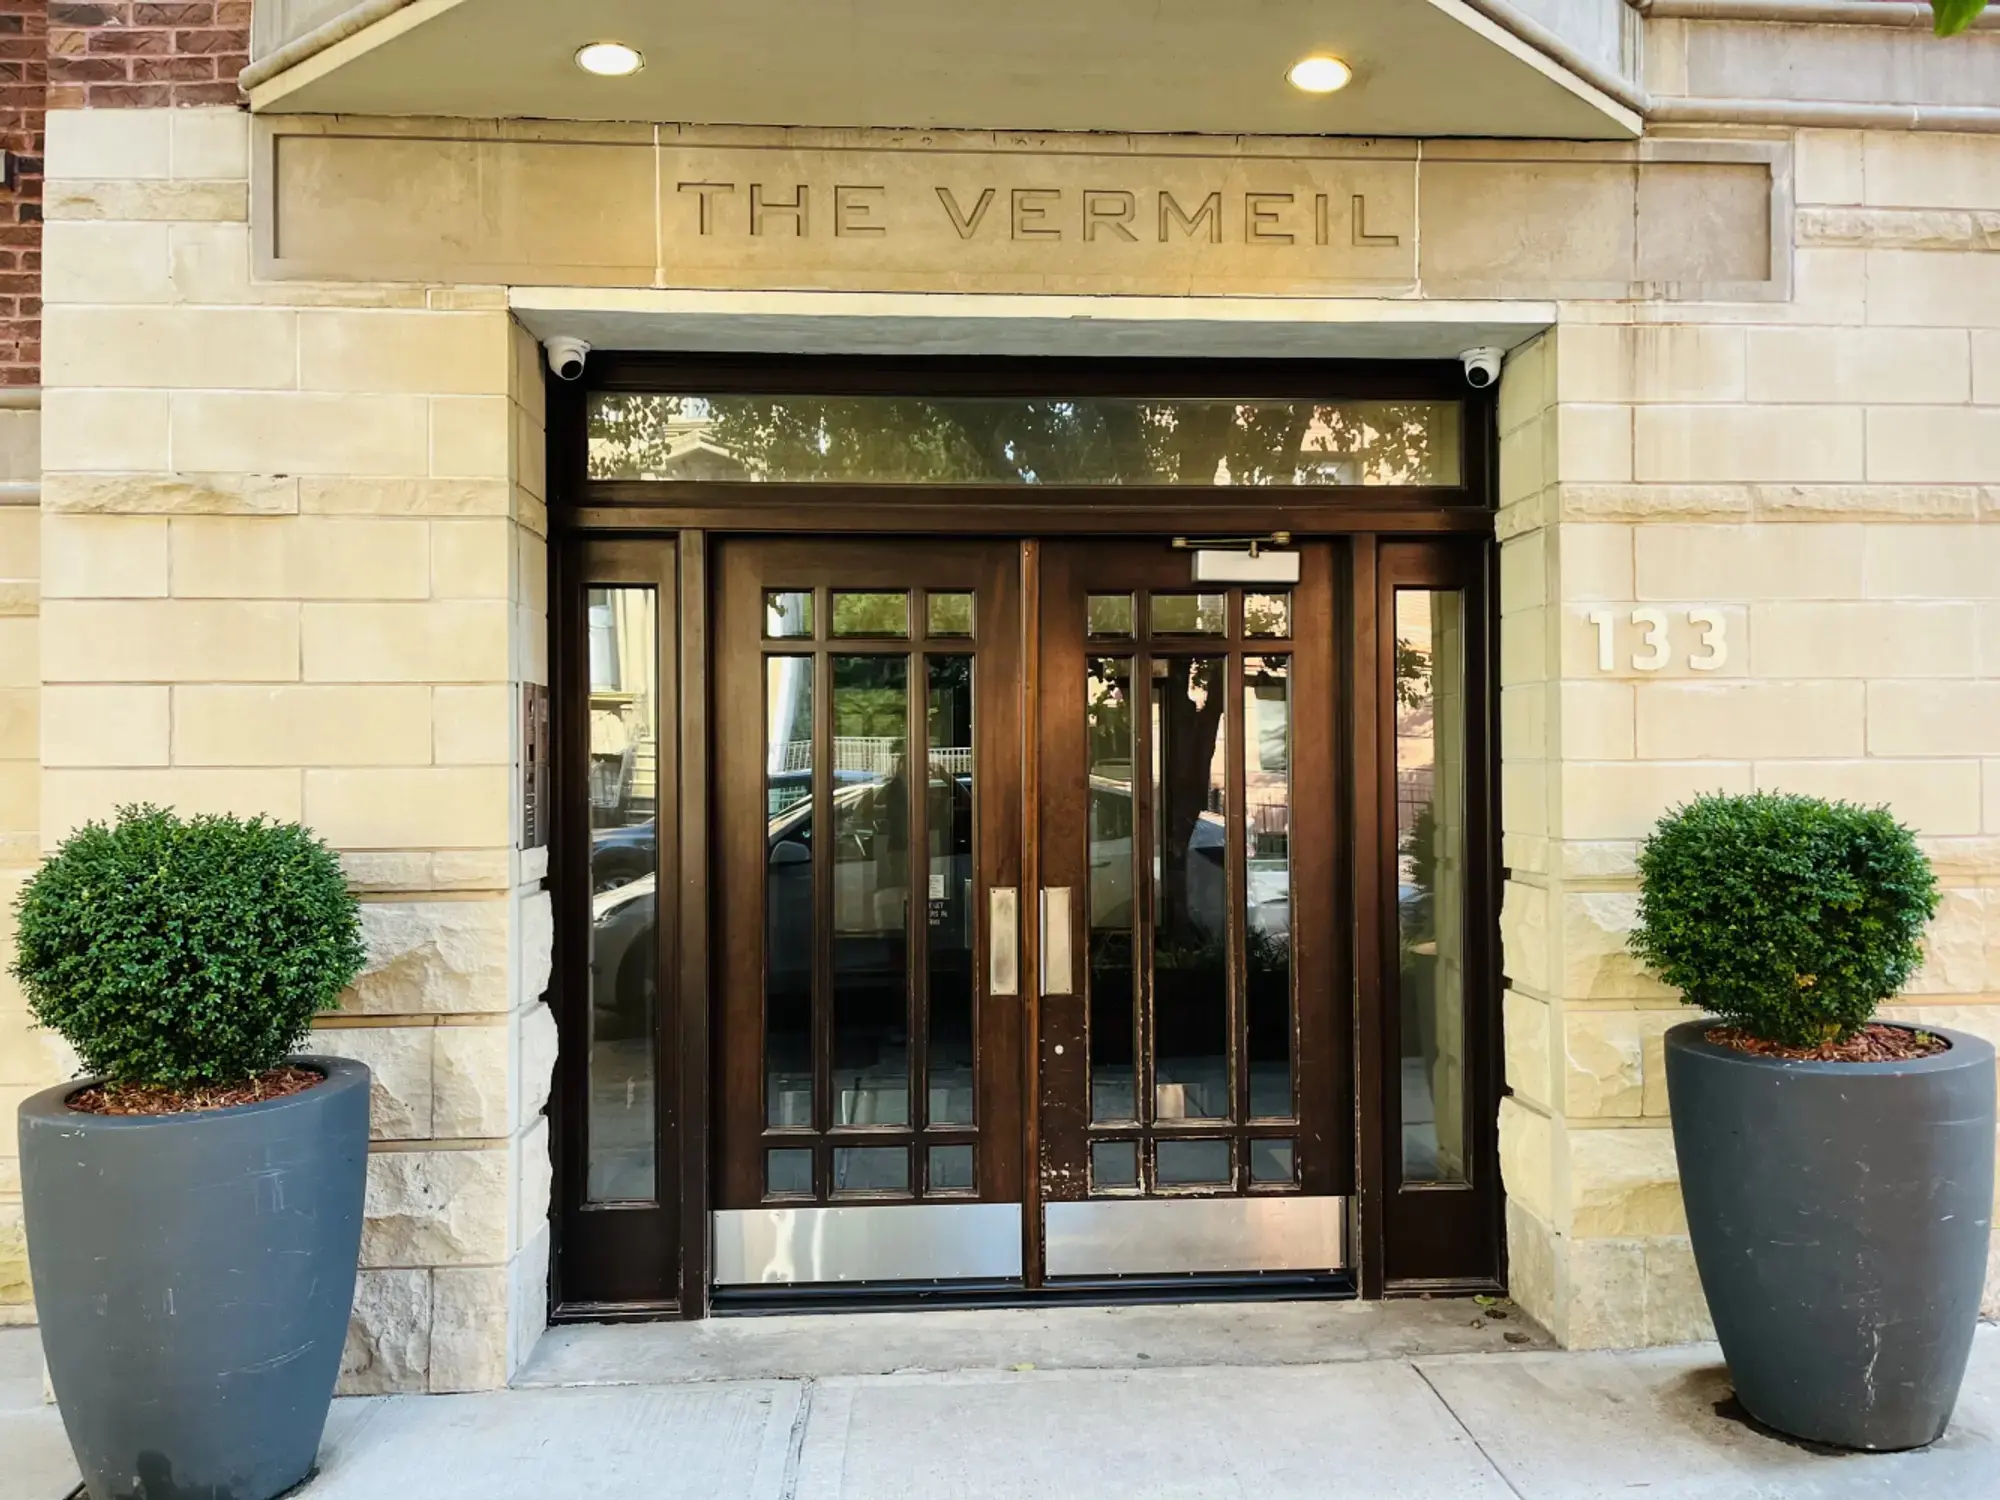 The Vermeil, 133 Sterling Place